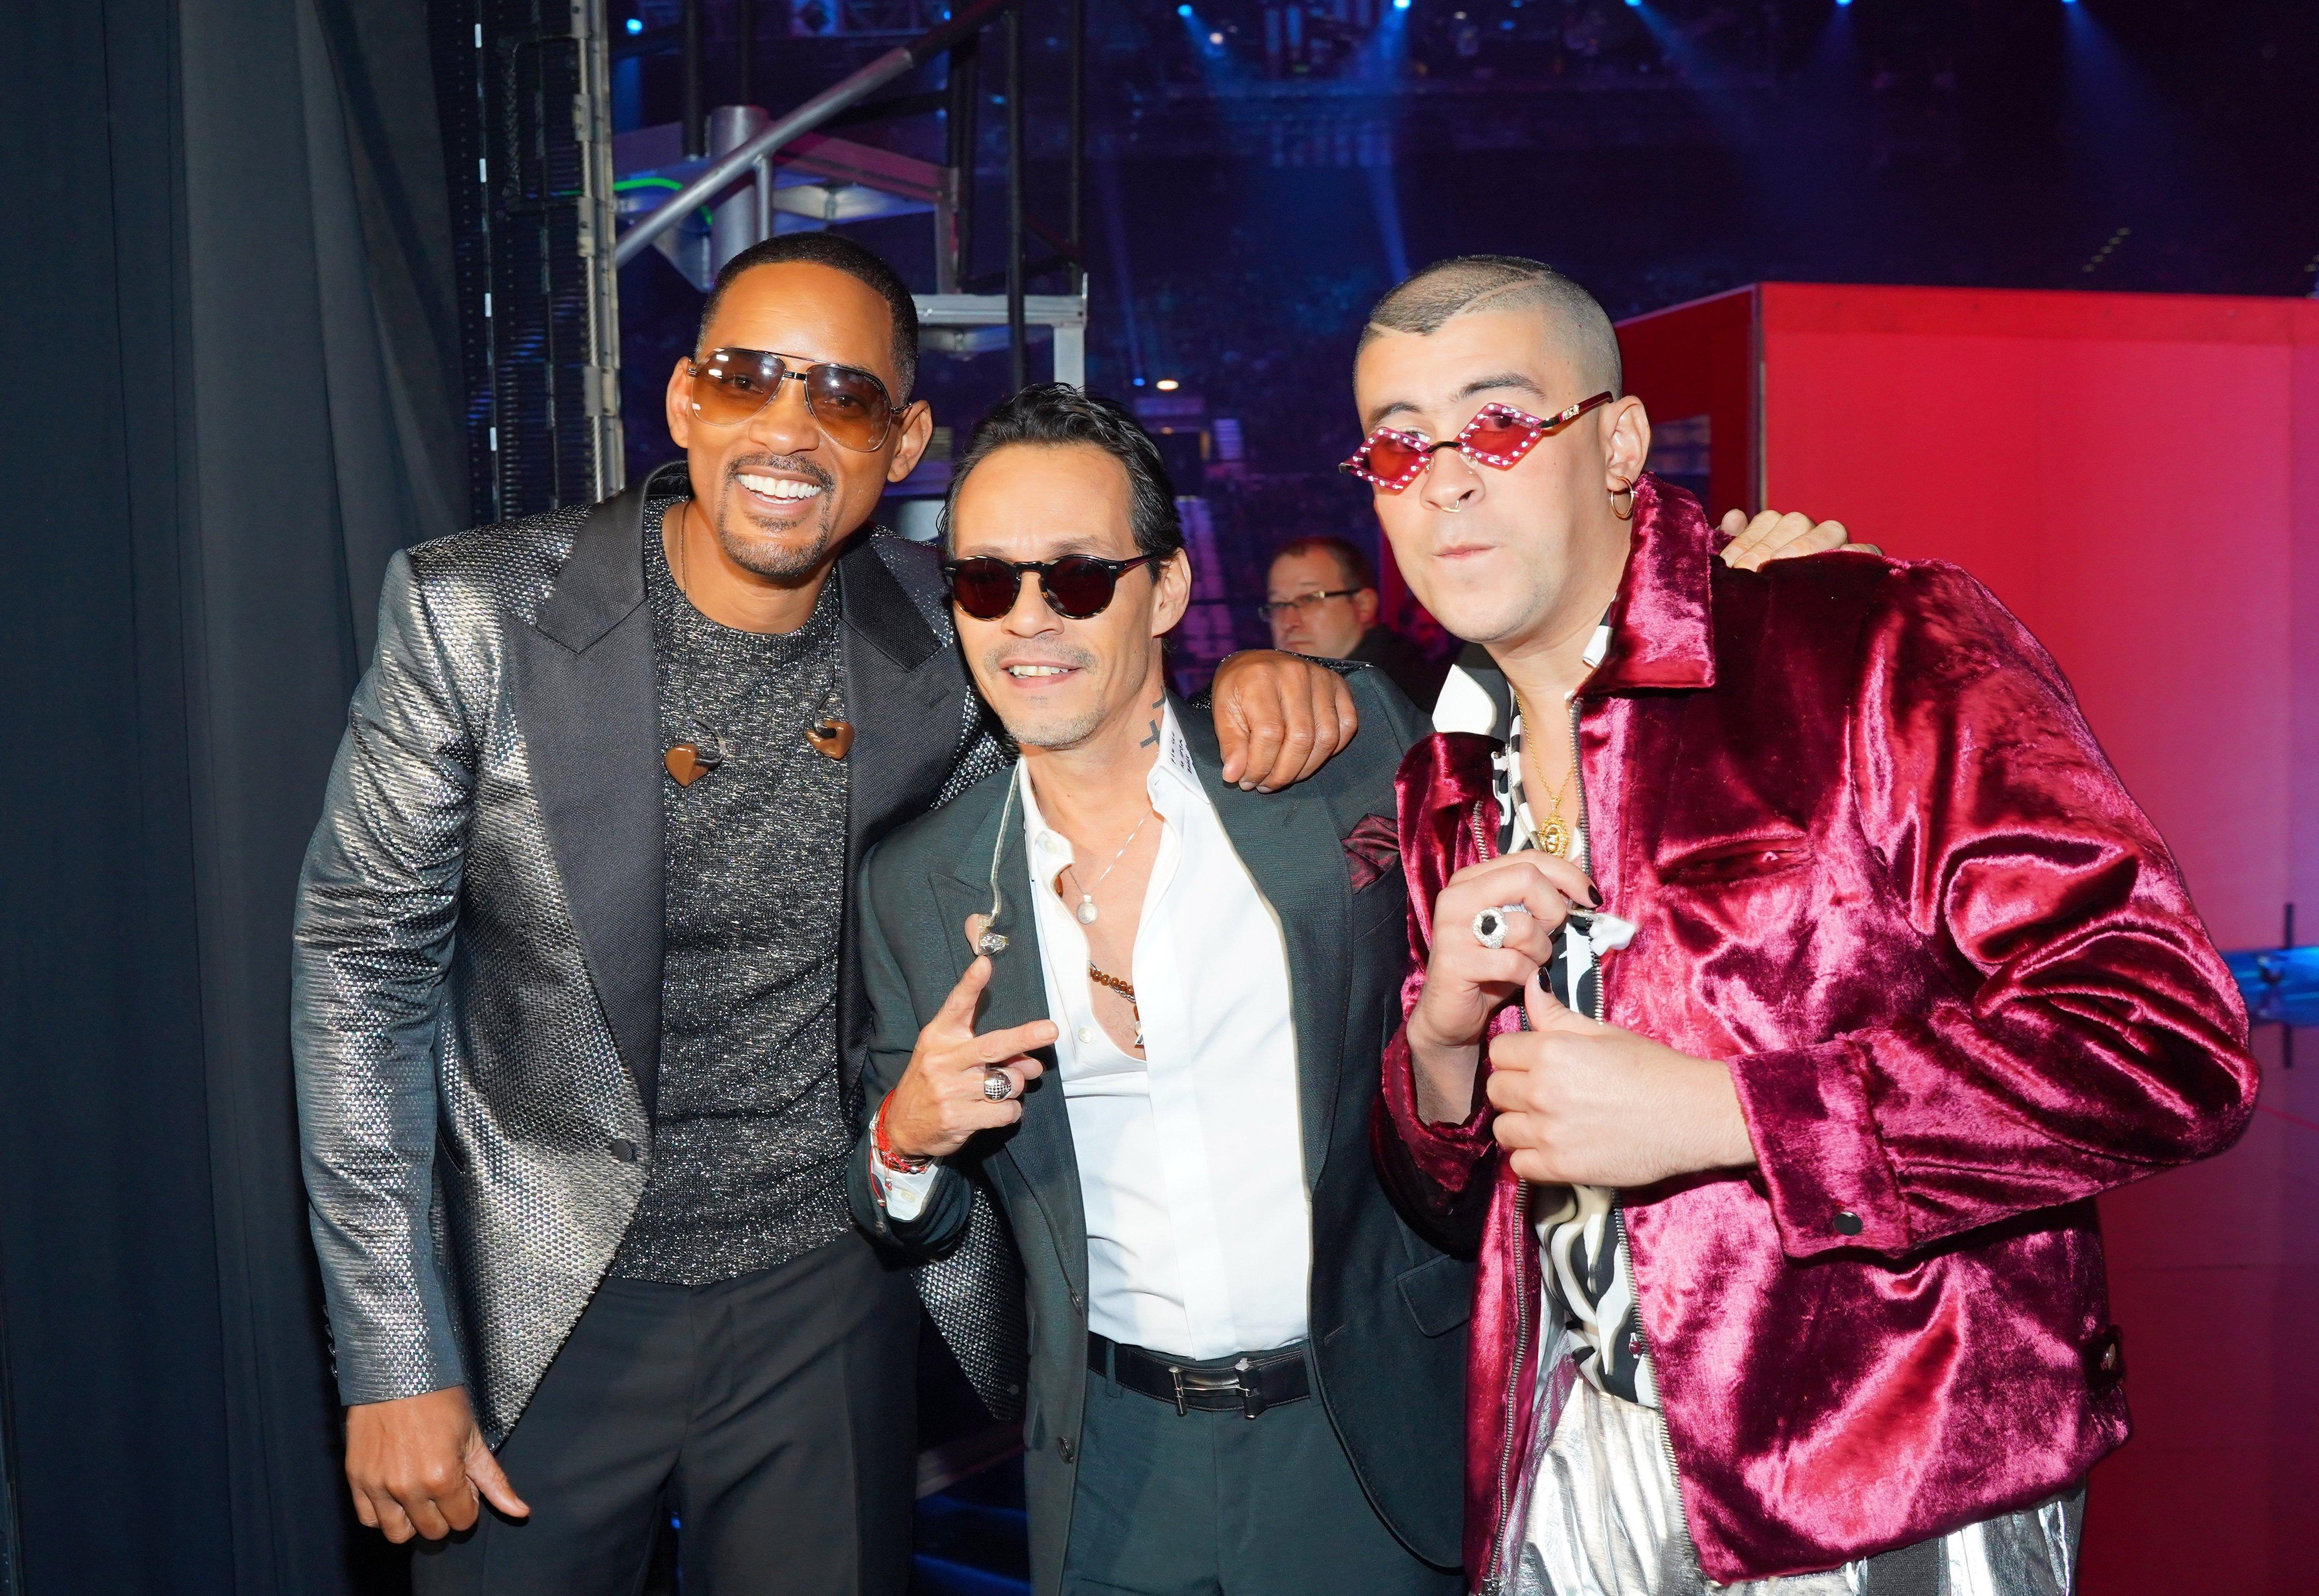 Will Smith, Marc Anthony, and Bad Bunny